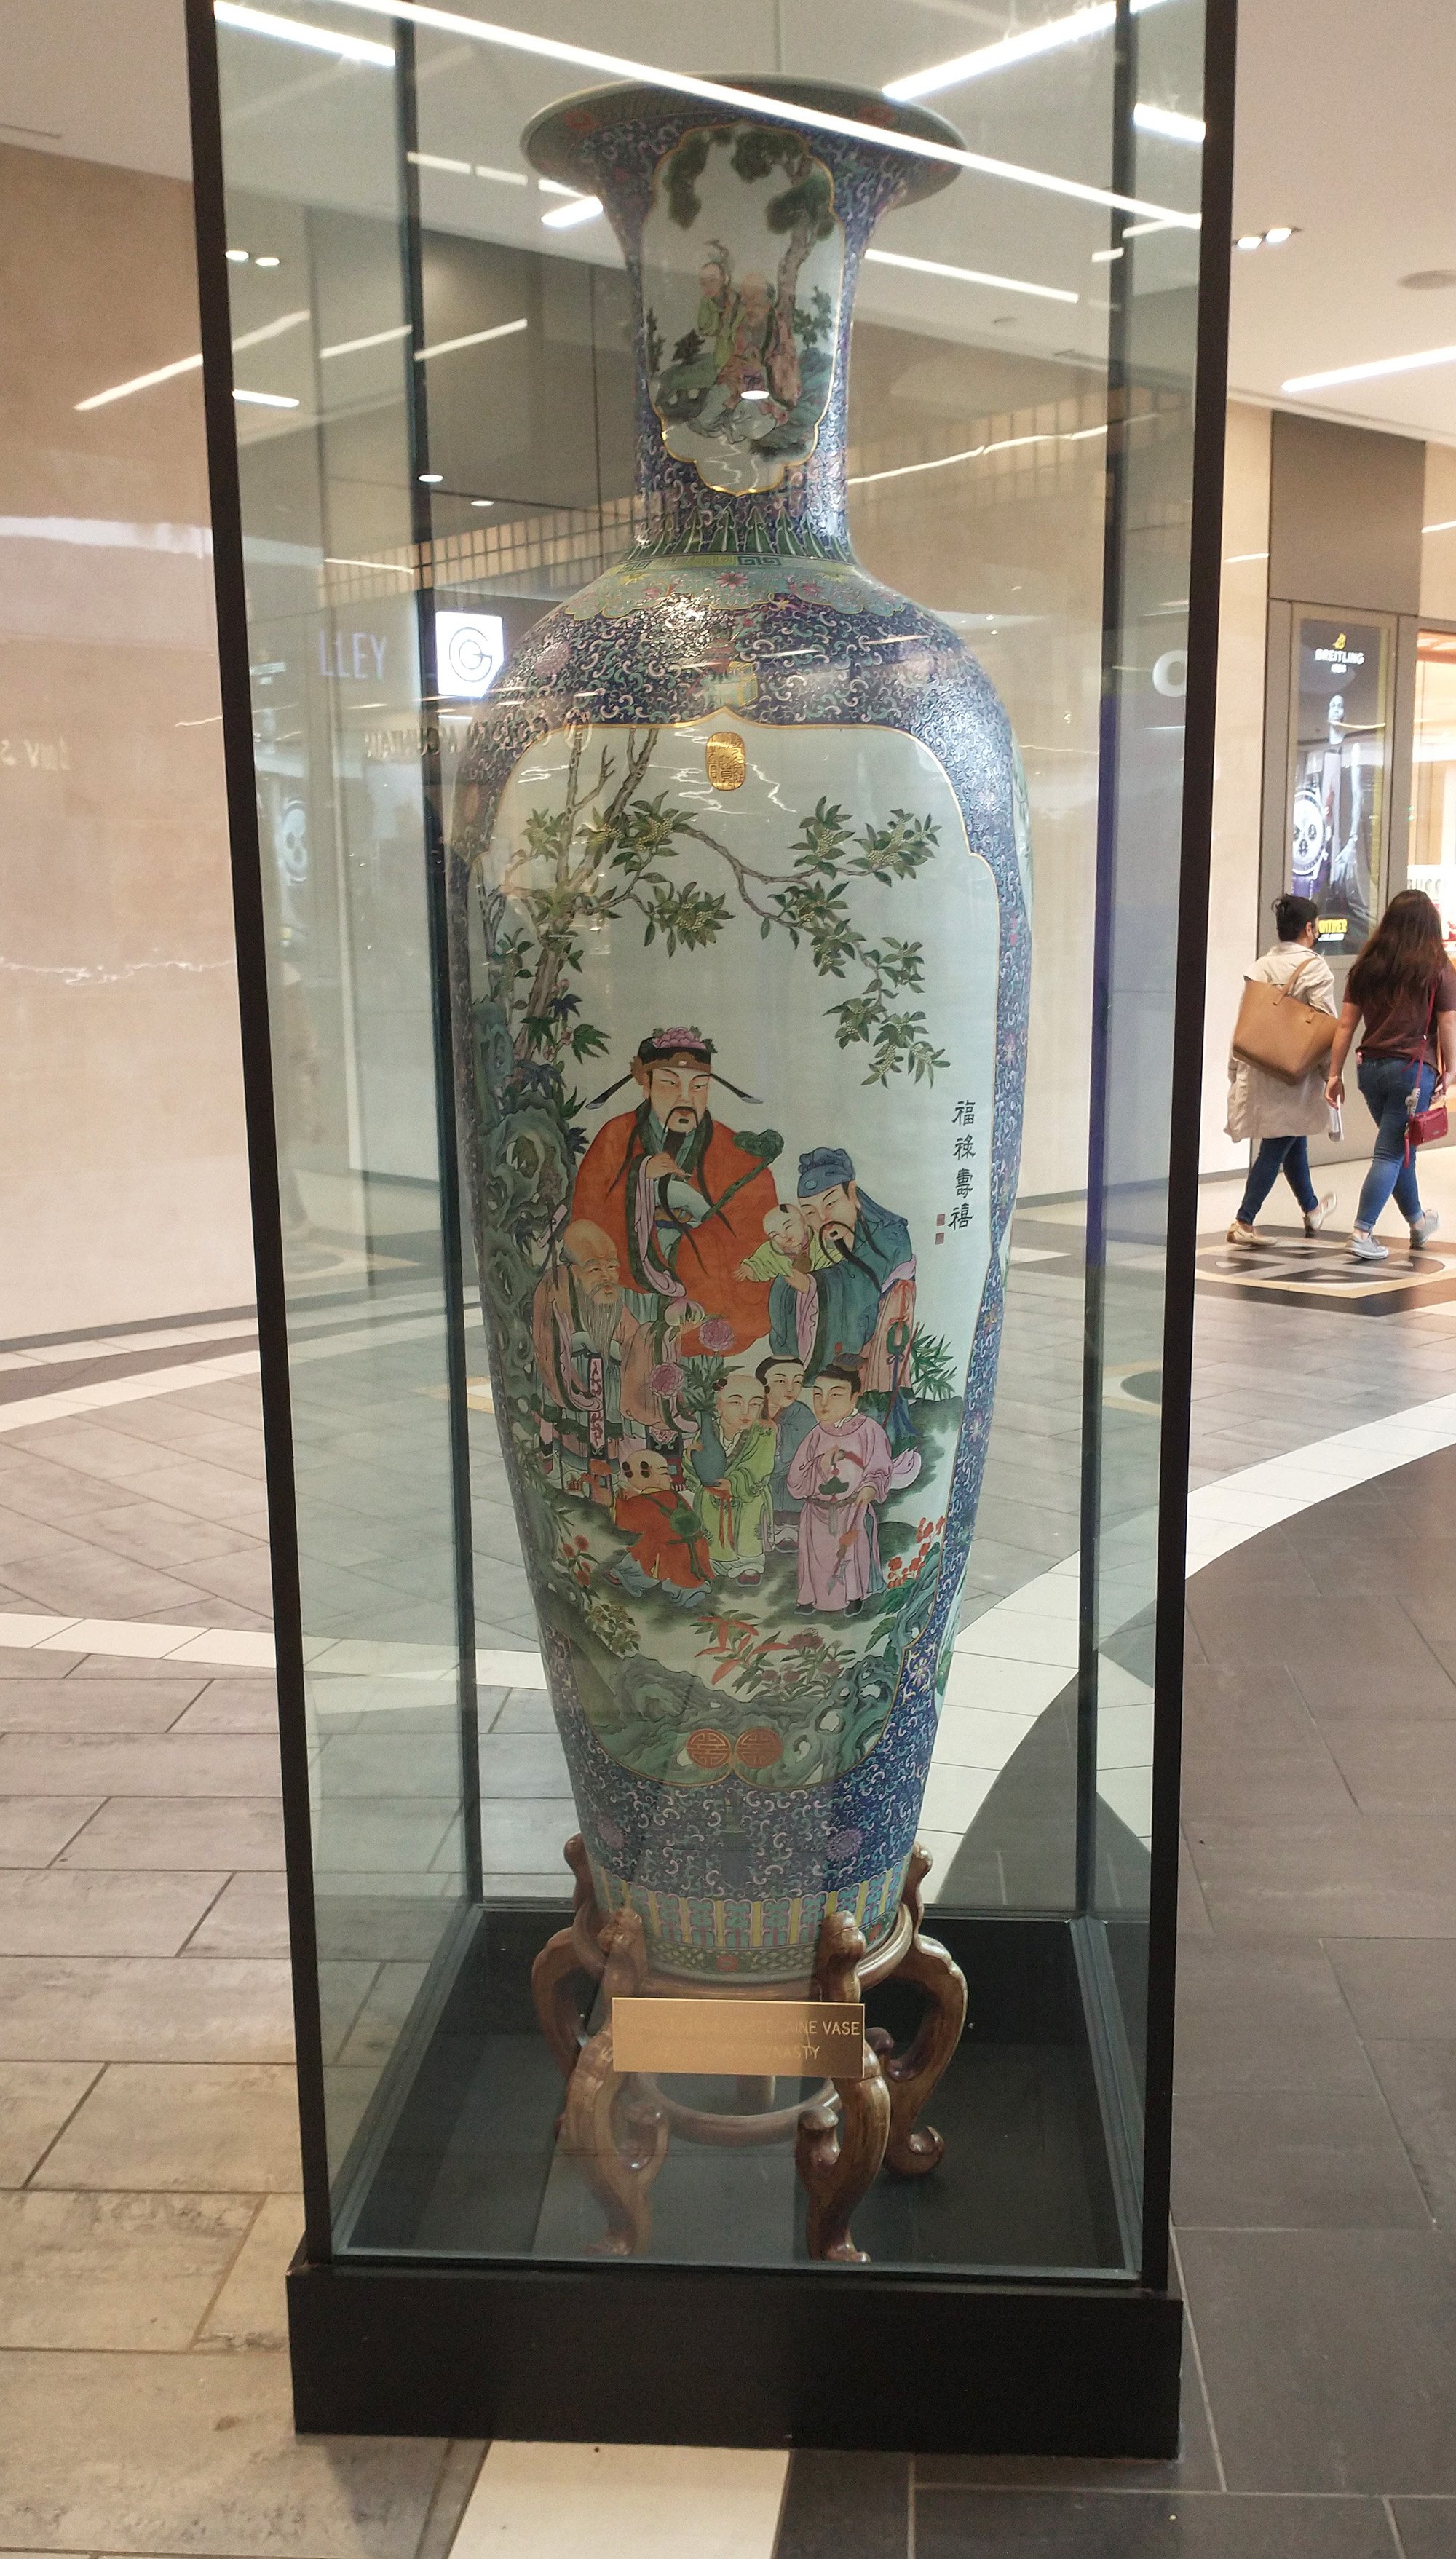 With 19th century "Ching" vases. They are very cool and detailed up front though.